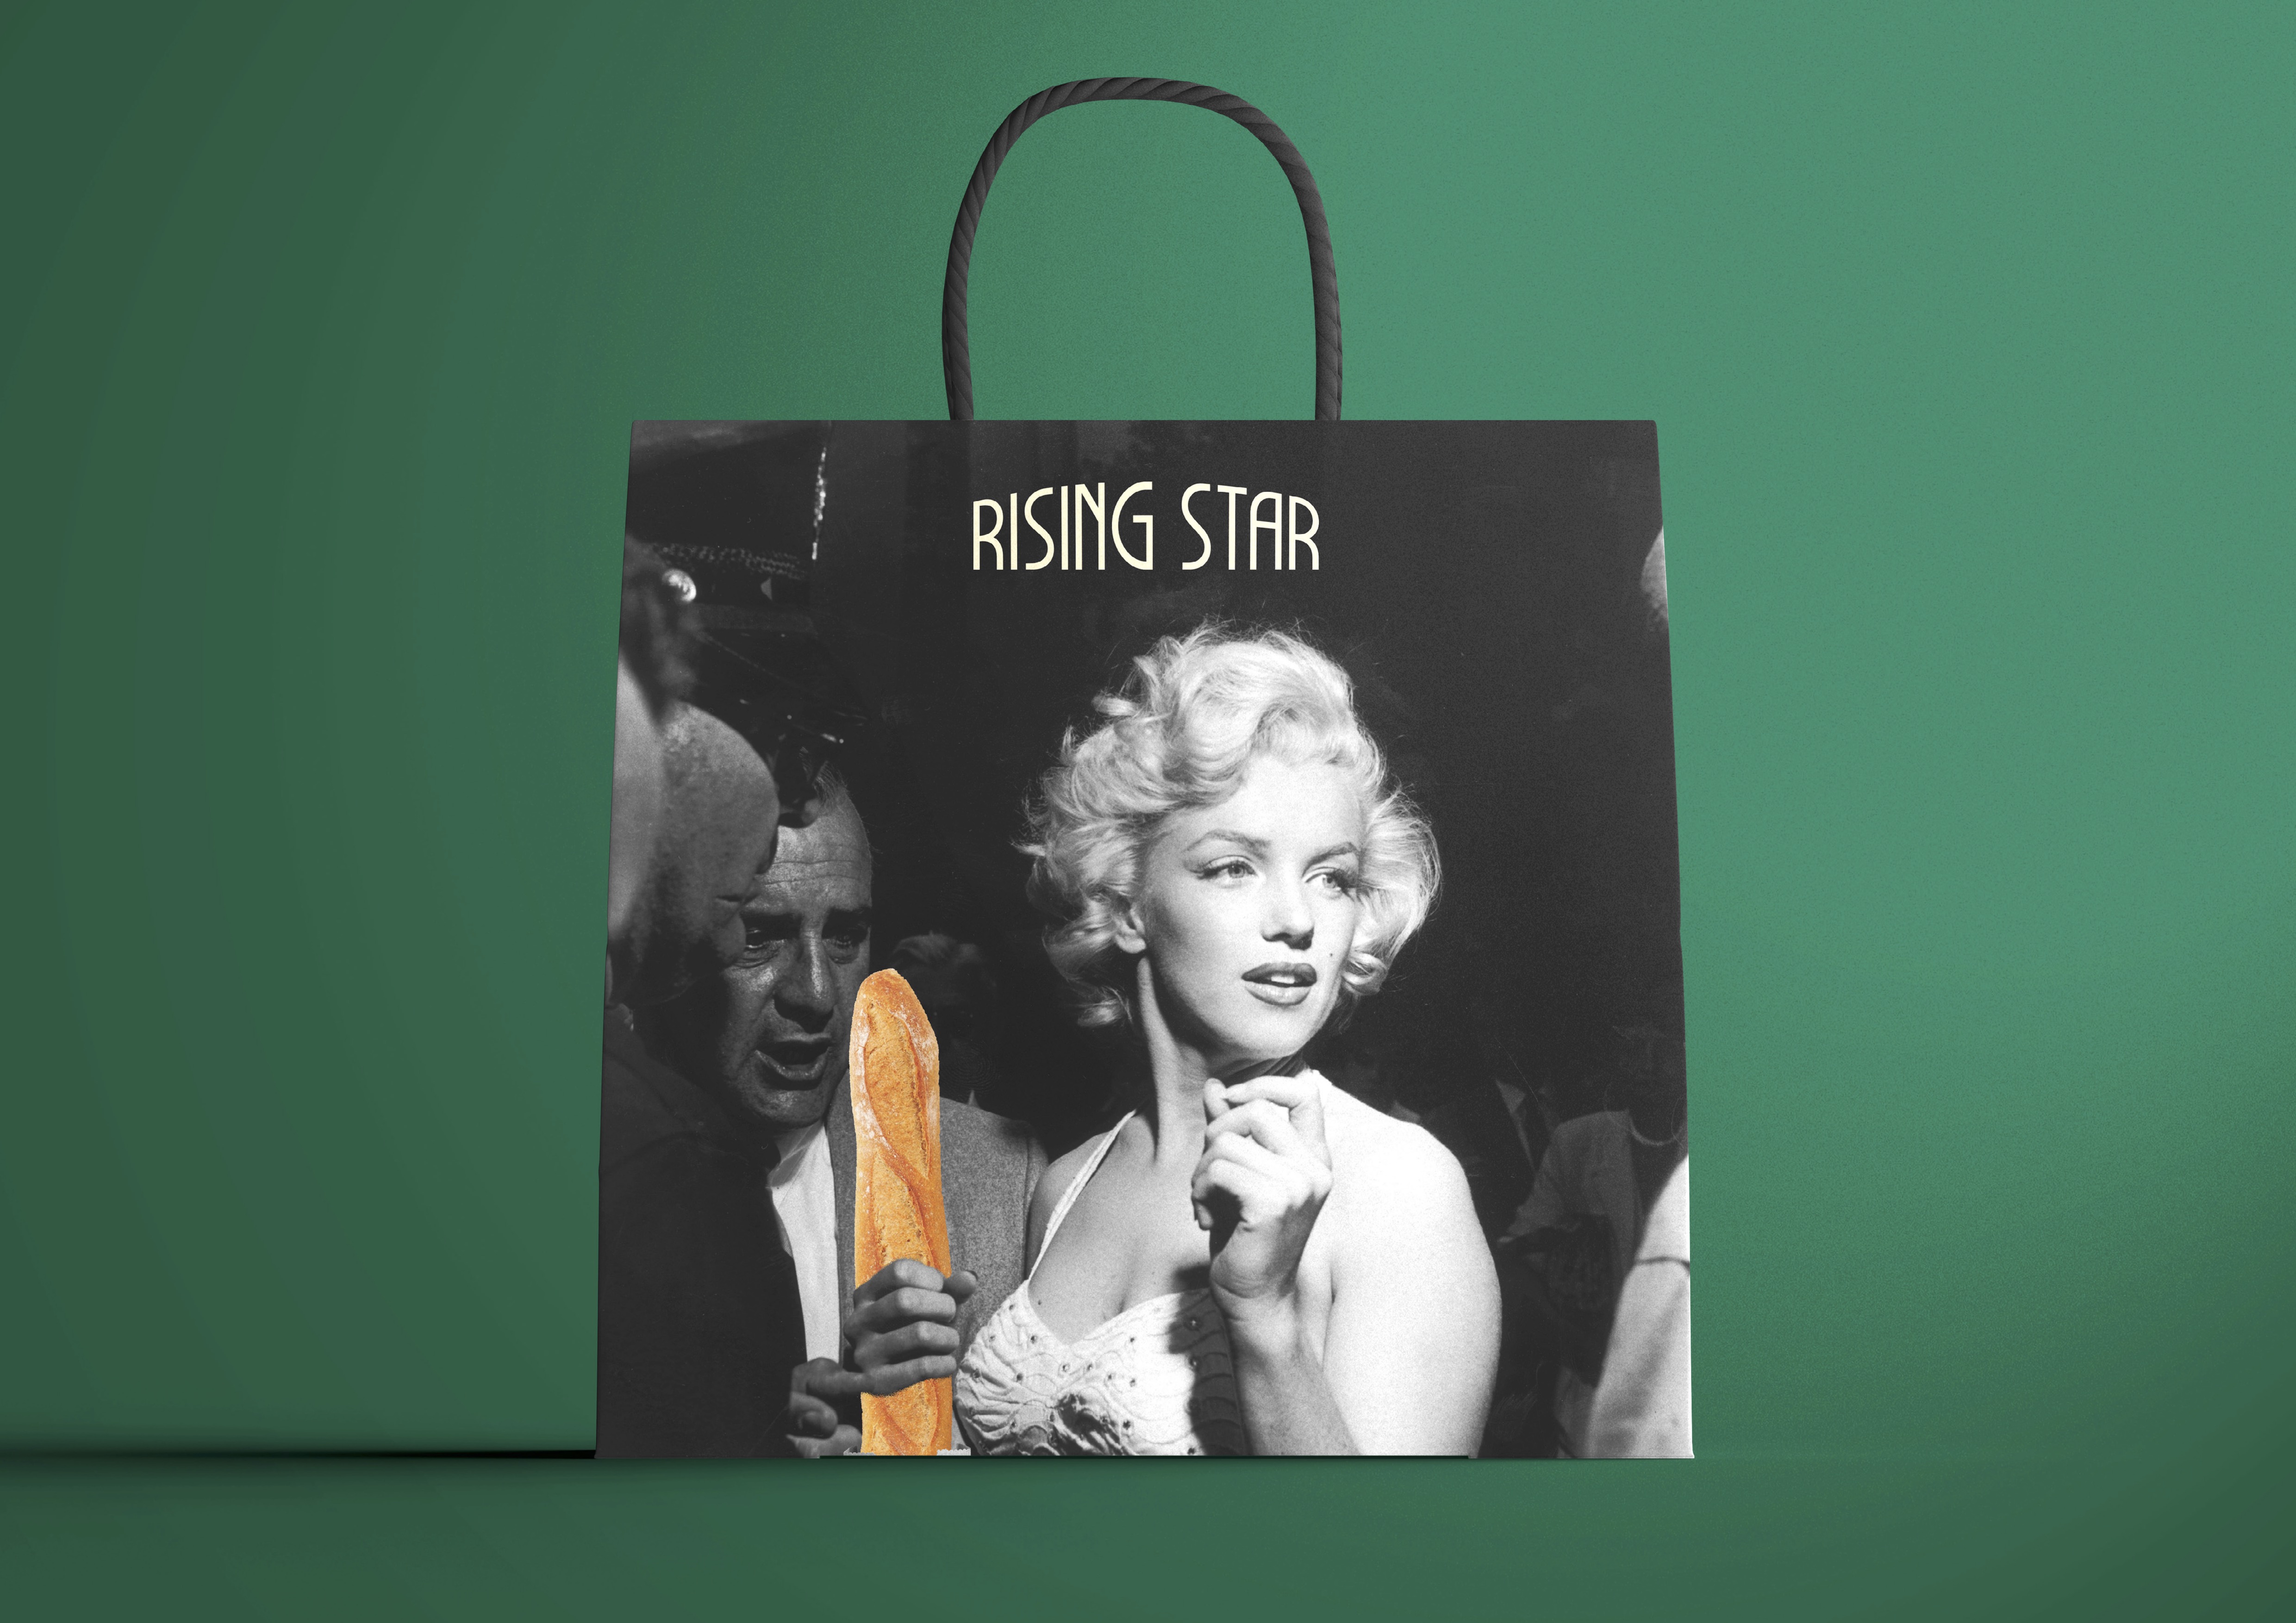 Rising Star Bakery bag by Thea Reeder. Featuring Marilyn Monroe, a baguette and the rising star logo.